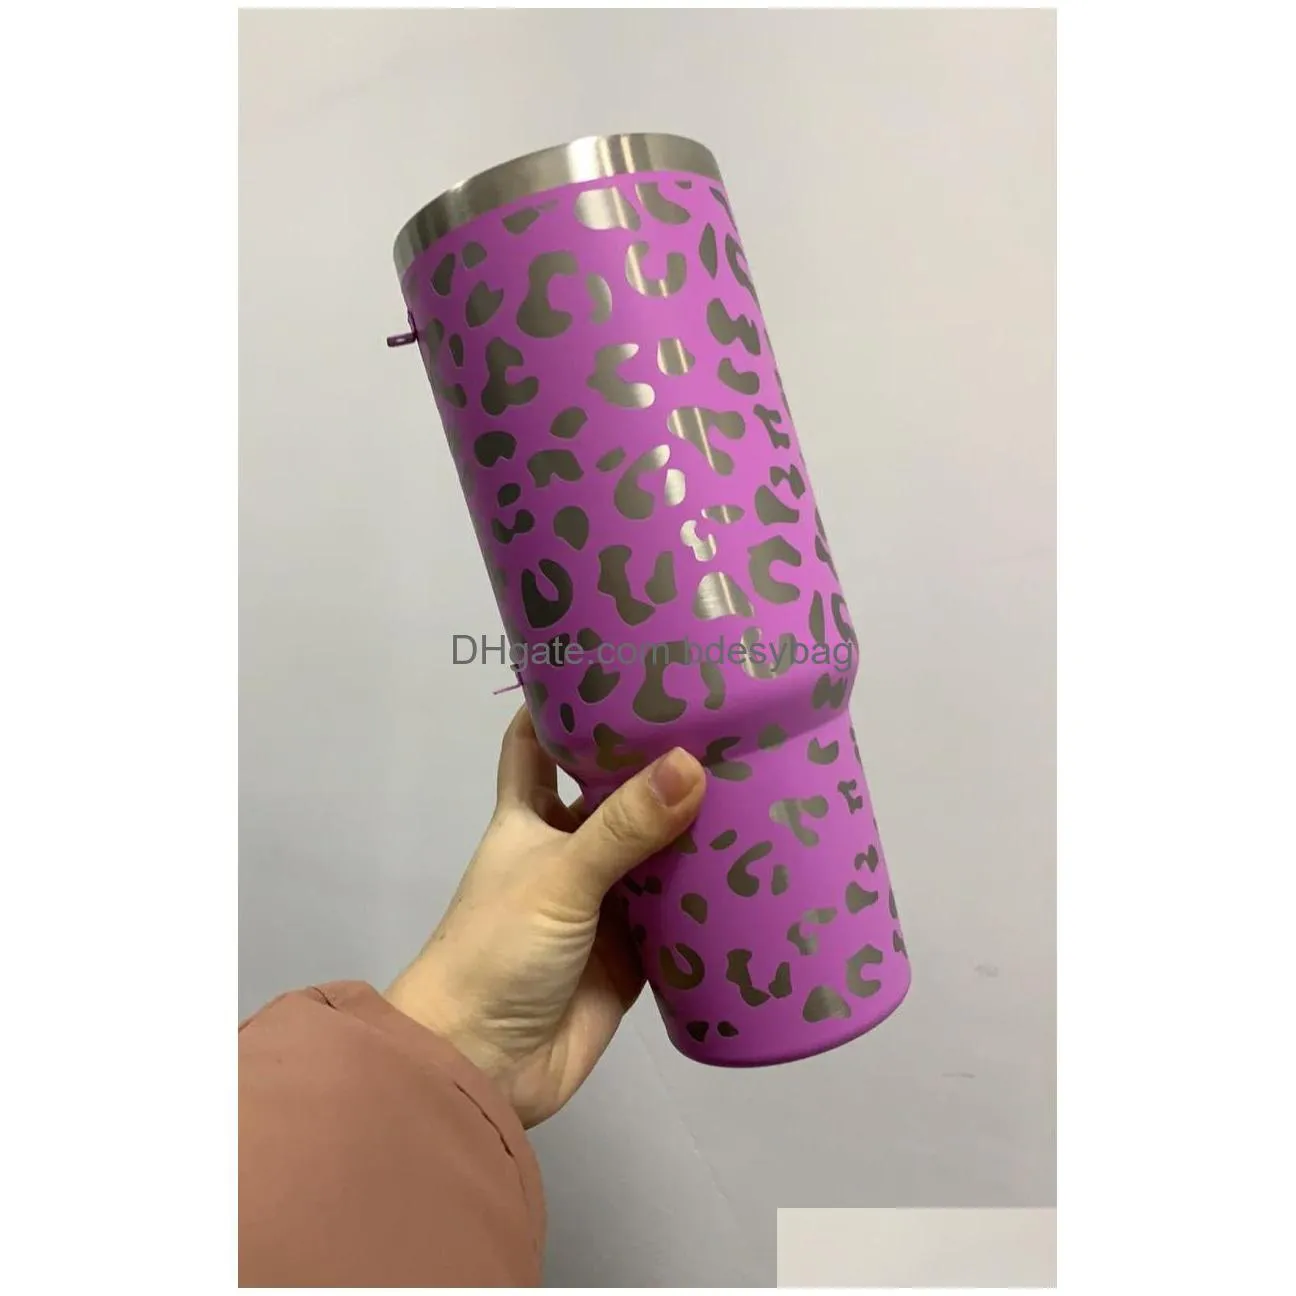 40oz stainless steel tumbler with handle lid straw big capacity beer mug leopard water bottle stanley outdoor camping cup vacuum insulated drinking cups